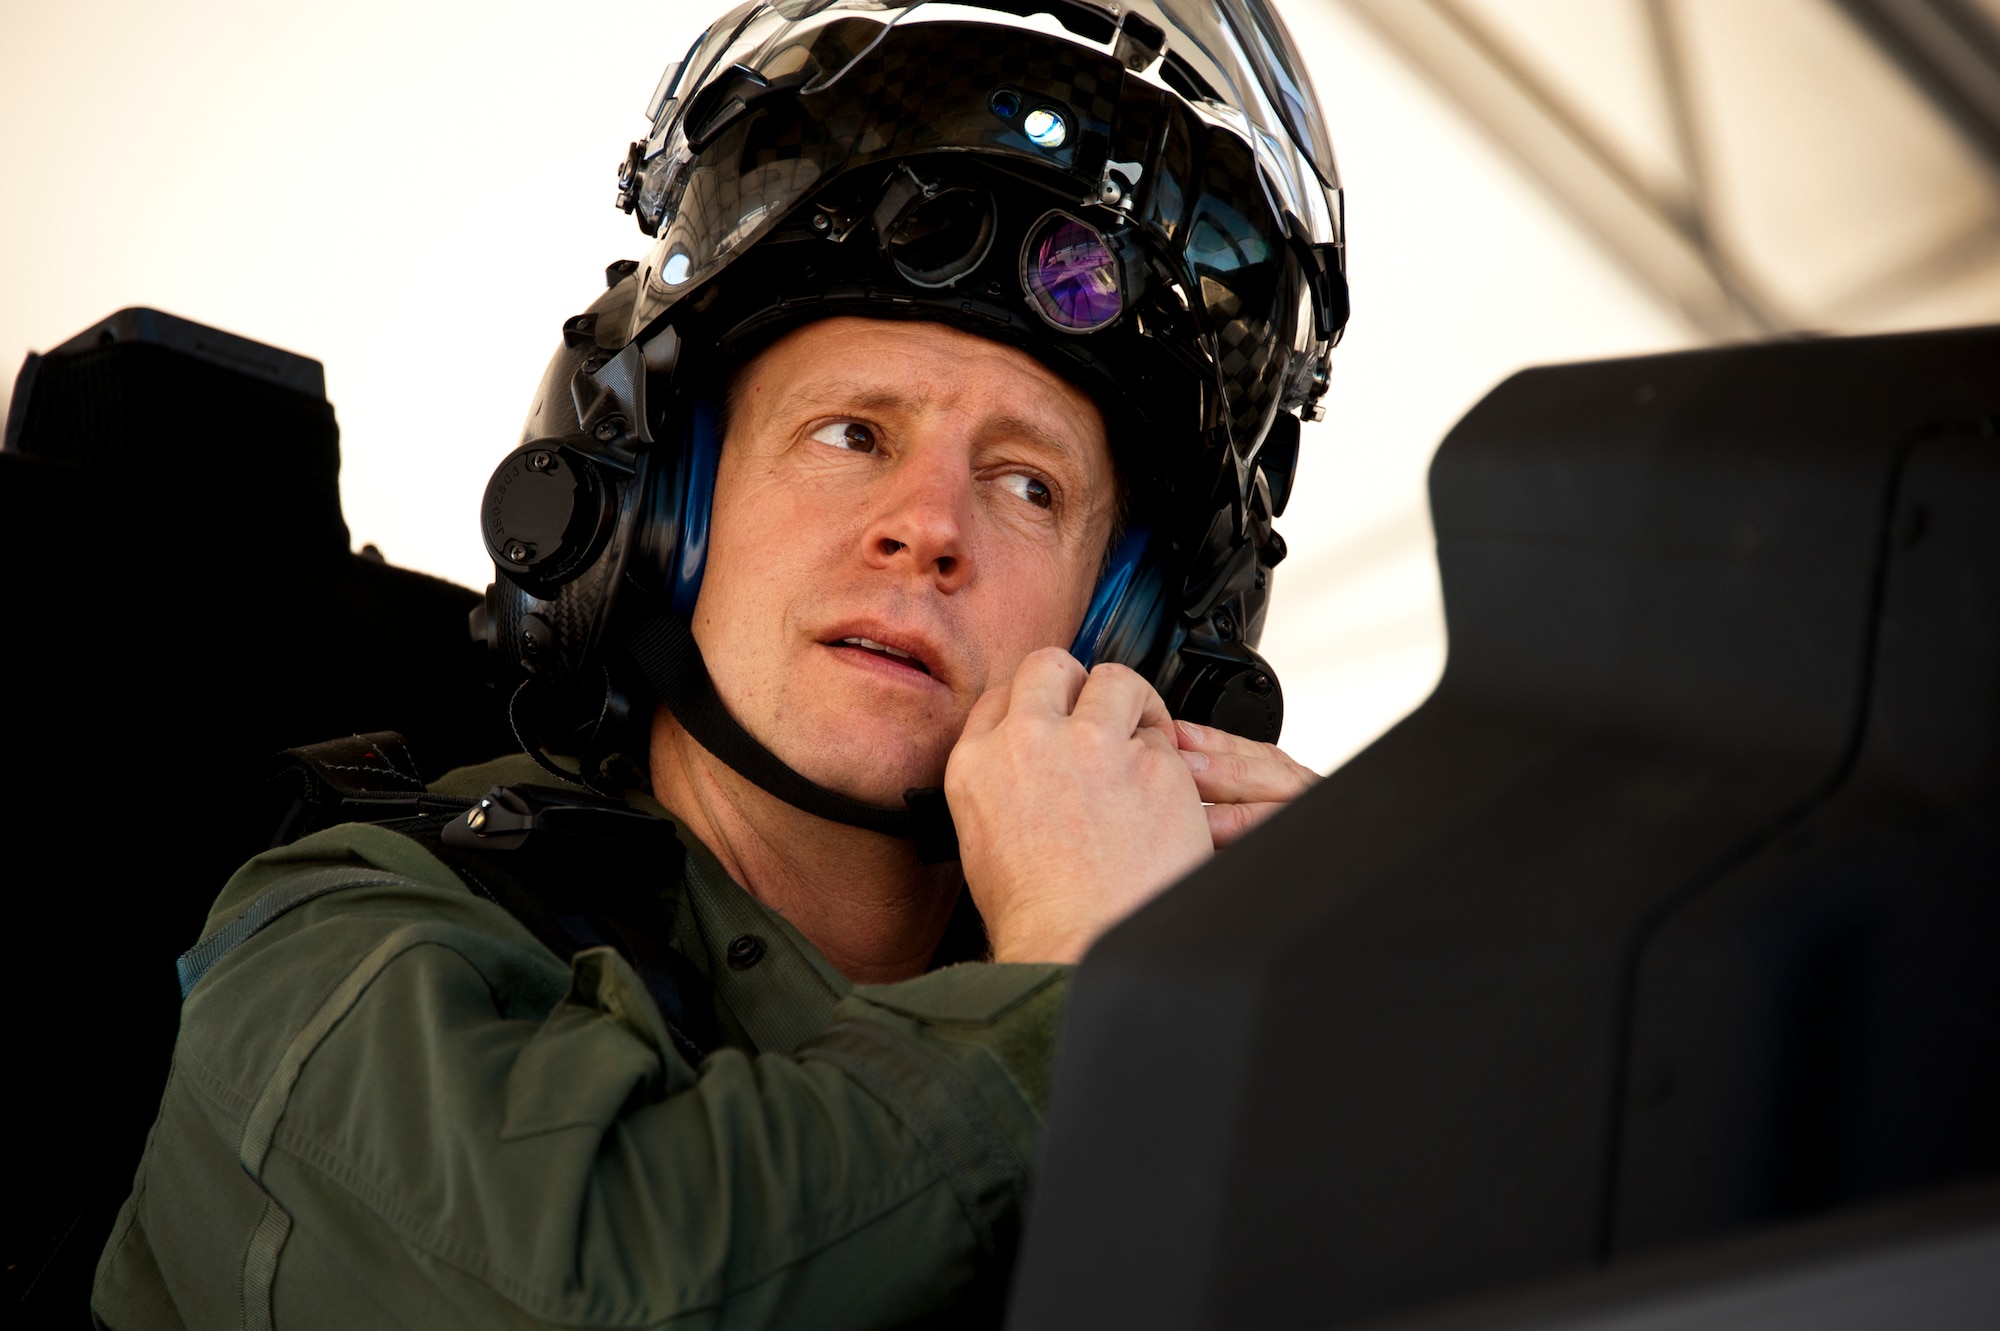 Lt. Col. Eric Smith, the 58th Fighter Squadron director of operations, secures his helmet from the cockpit of the F-35A Lightning II joint strike fighter prior to its first-ever training sortie March 6 at Eglin Air Force Base, Fla.  Smith is the first Air Force pilot qualified to fly the F-35.  (U.S. Air Force photo/Samuel King Jr.)